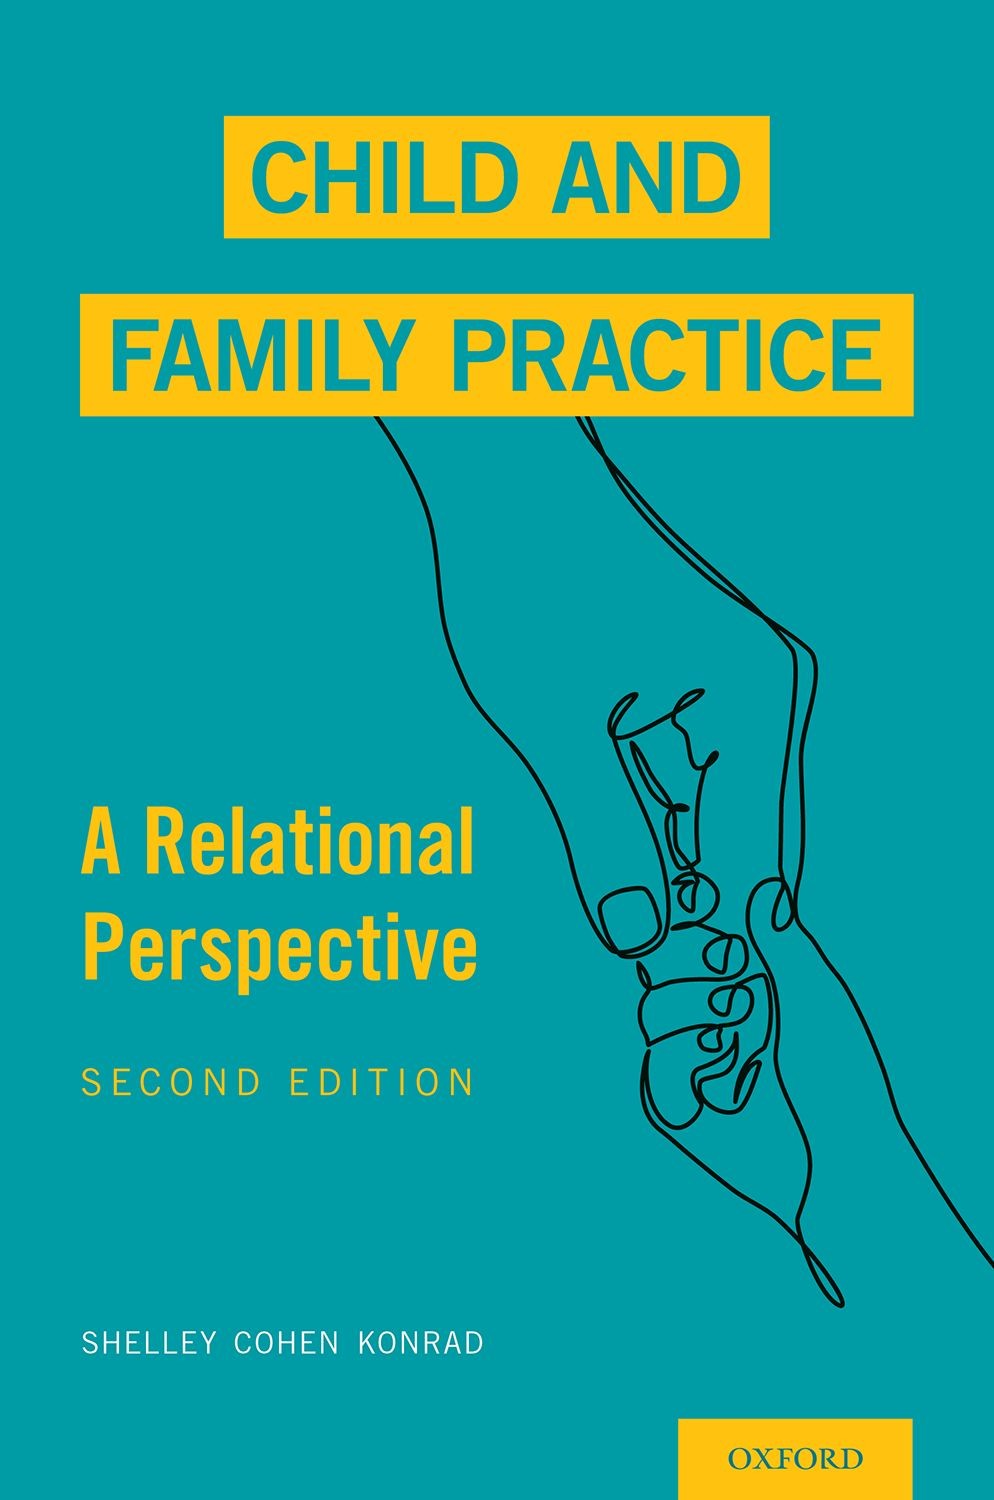 Cohen Konrad's book is grounded in the traditional social work theories of relationship 